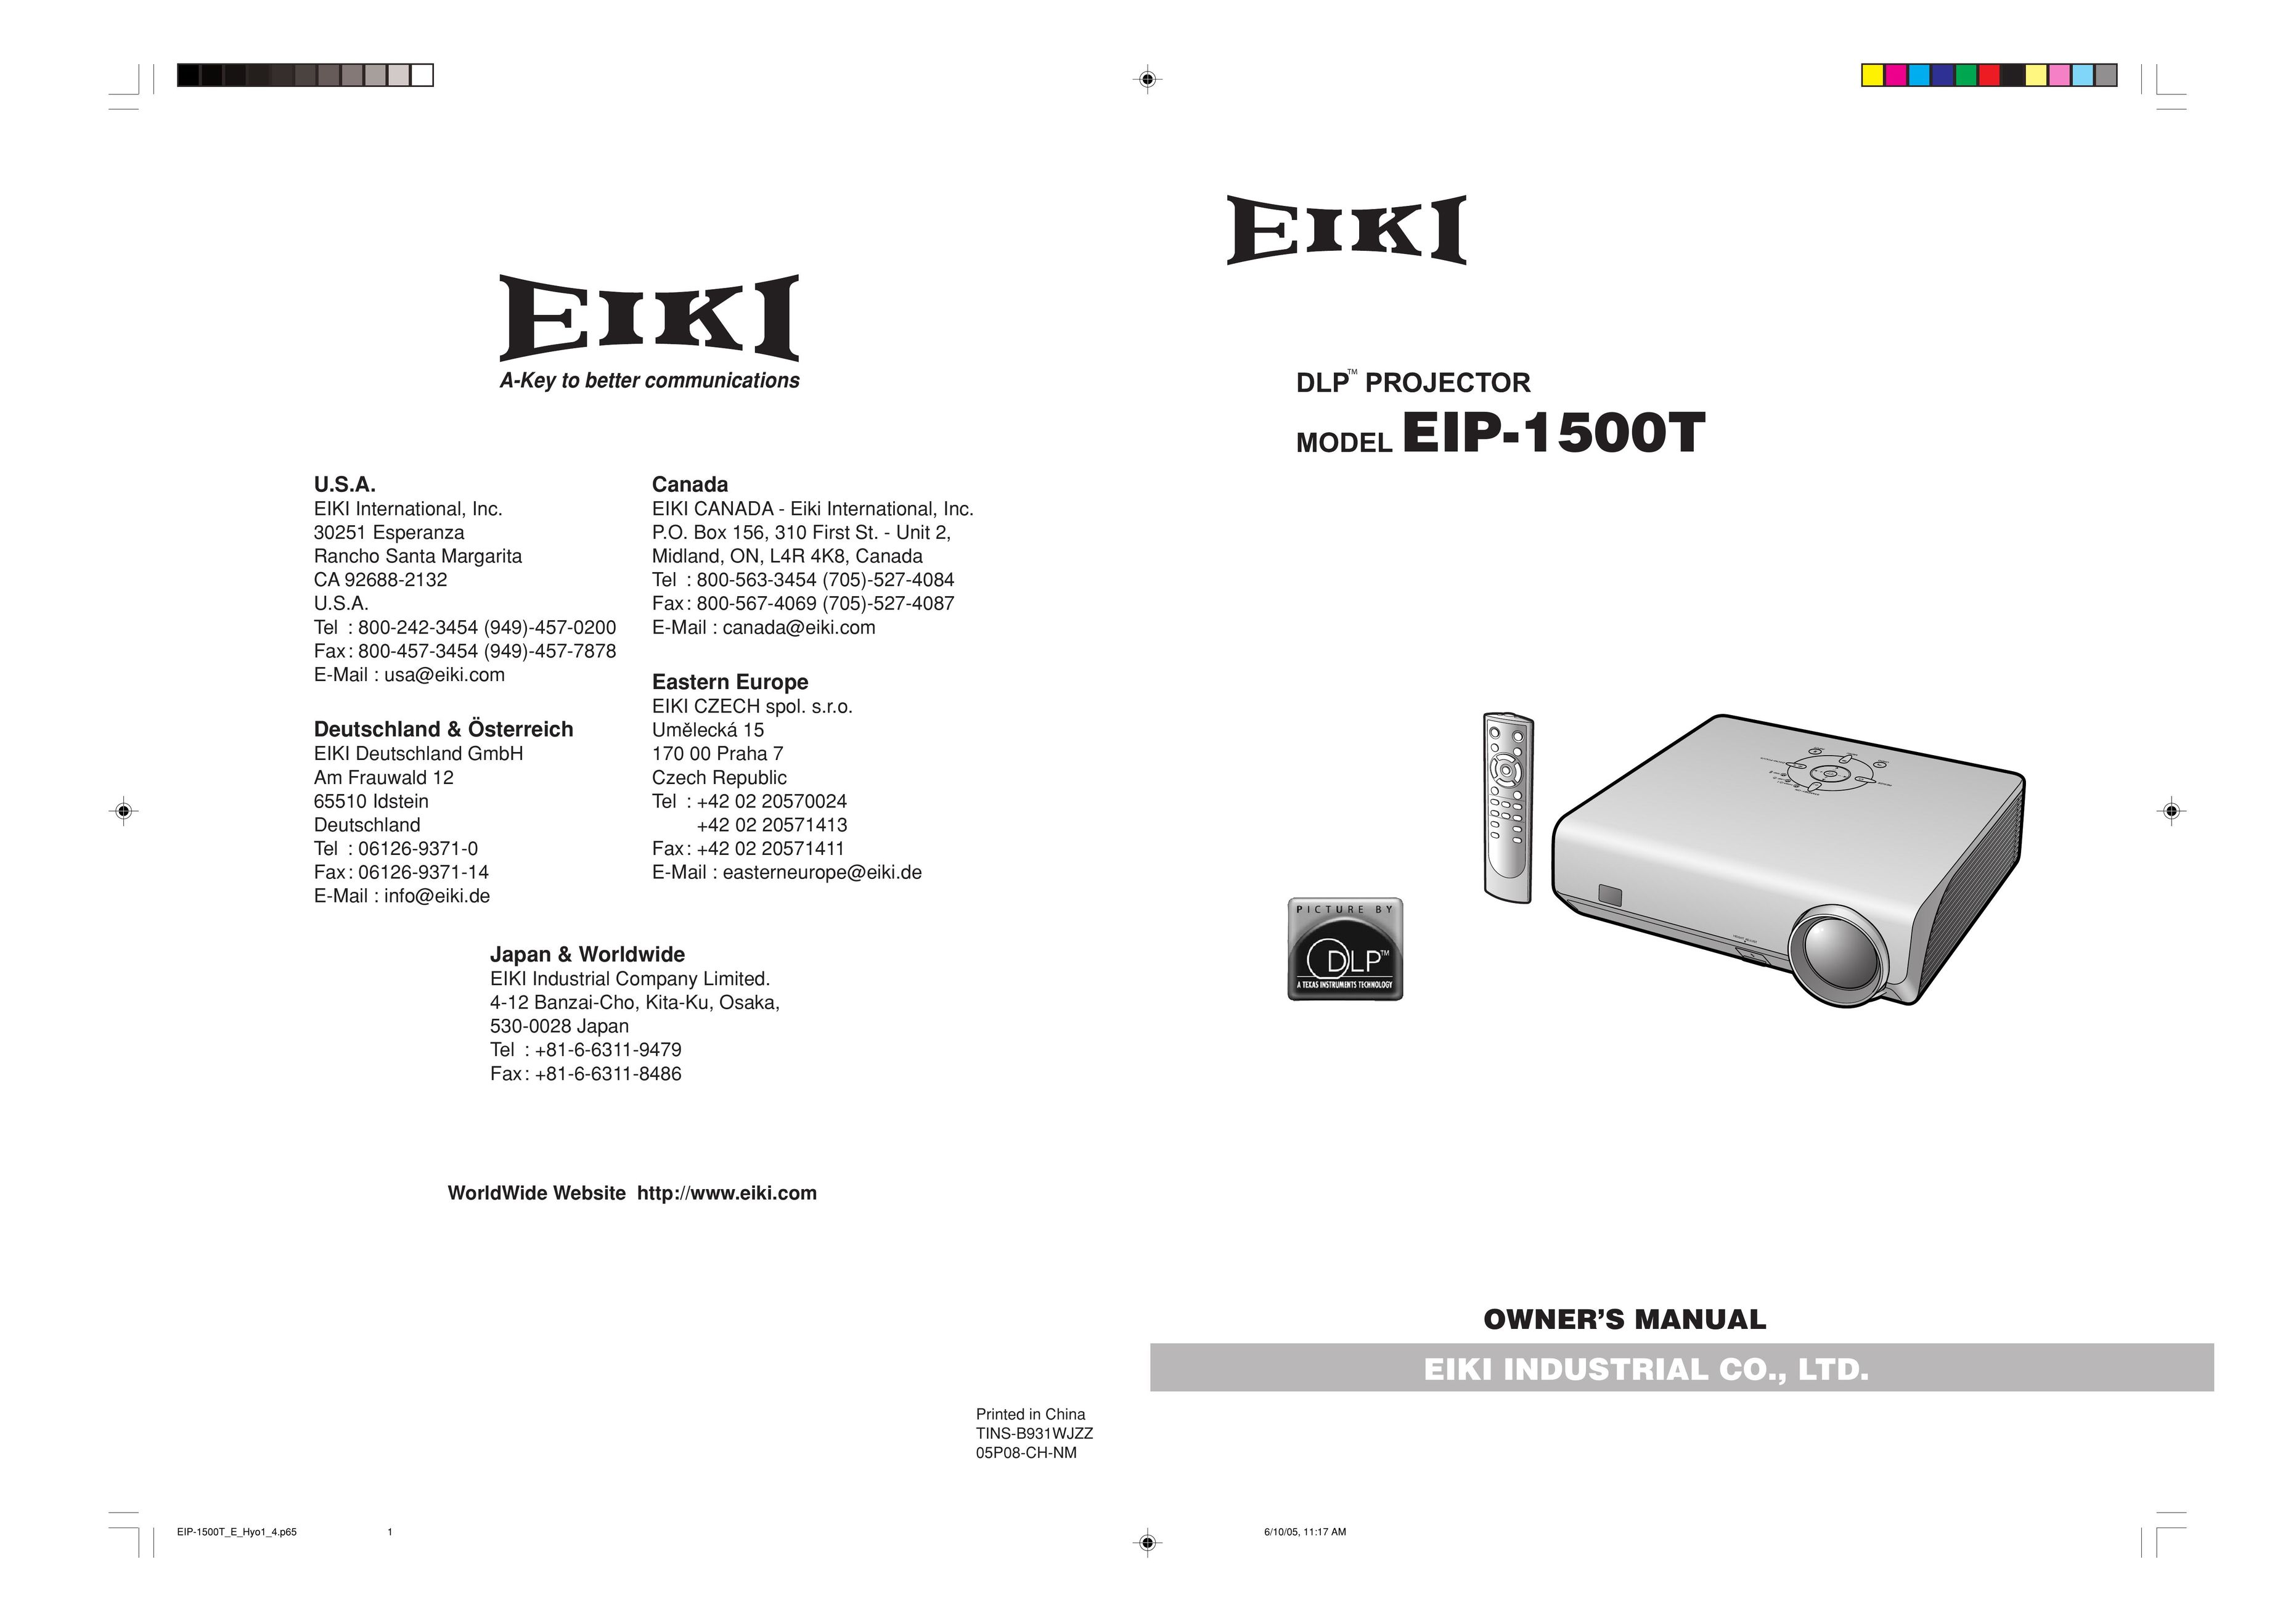 Eiki EIP-1500T Projector User Manual